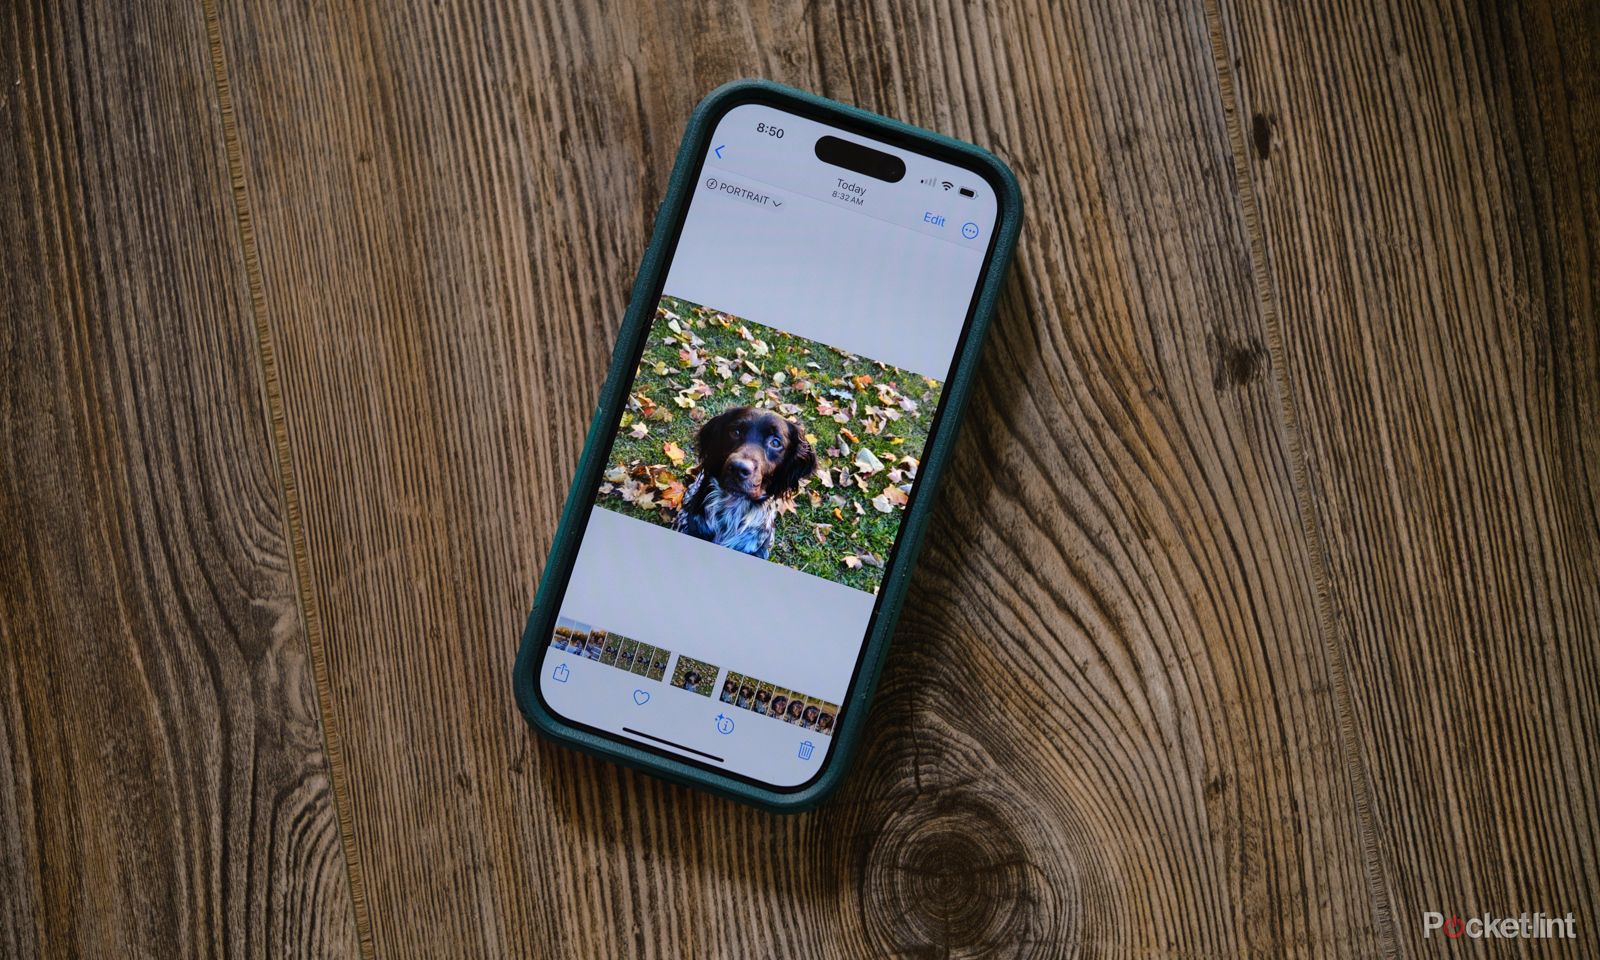 The image editing screen on an iPhone 15 Pro